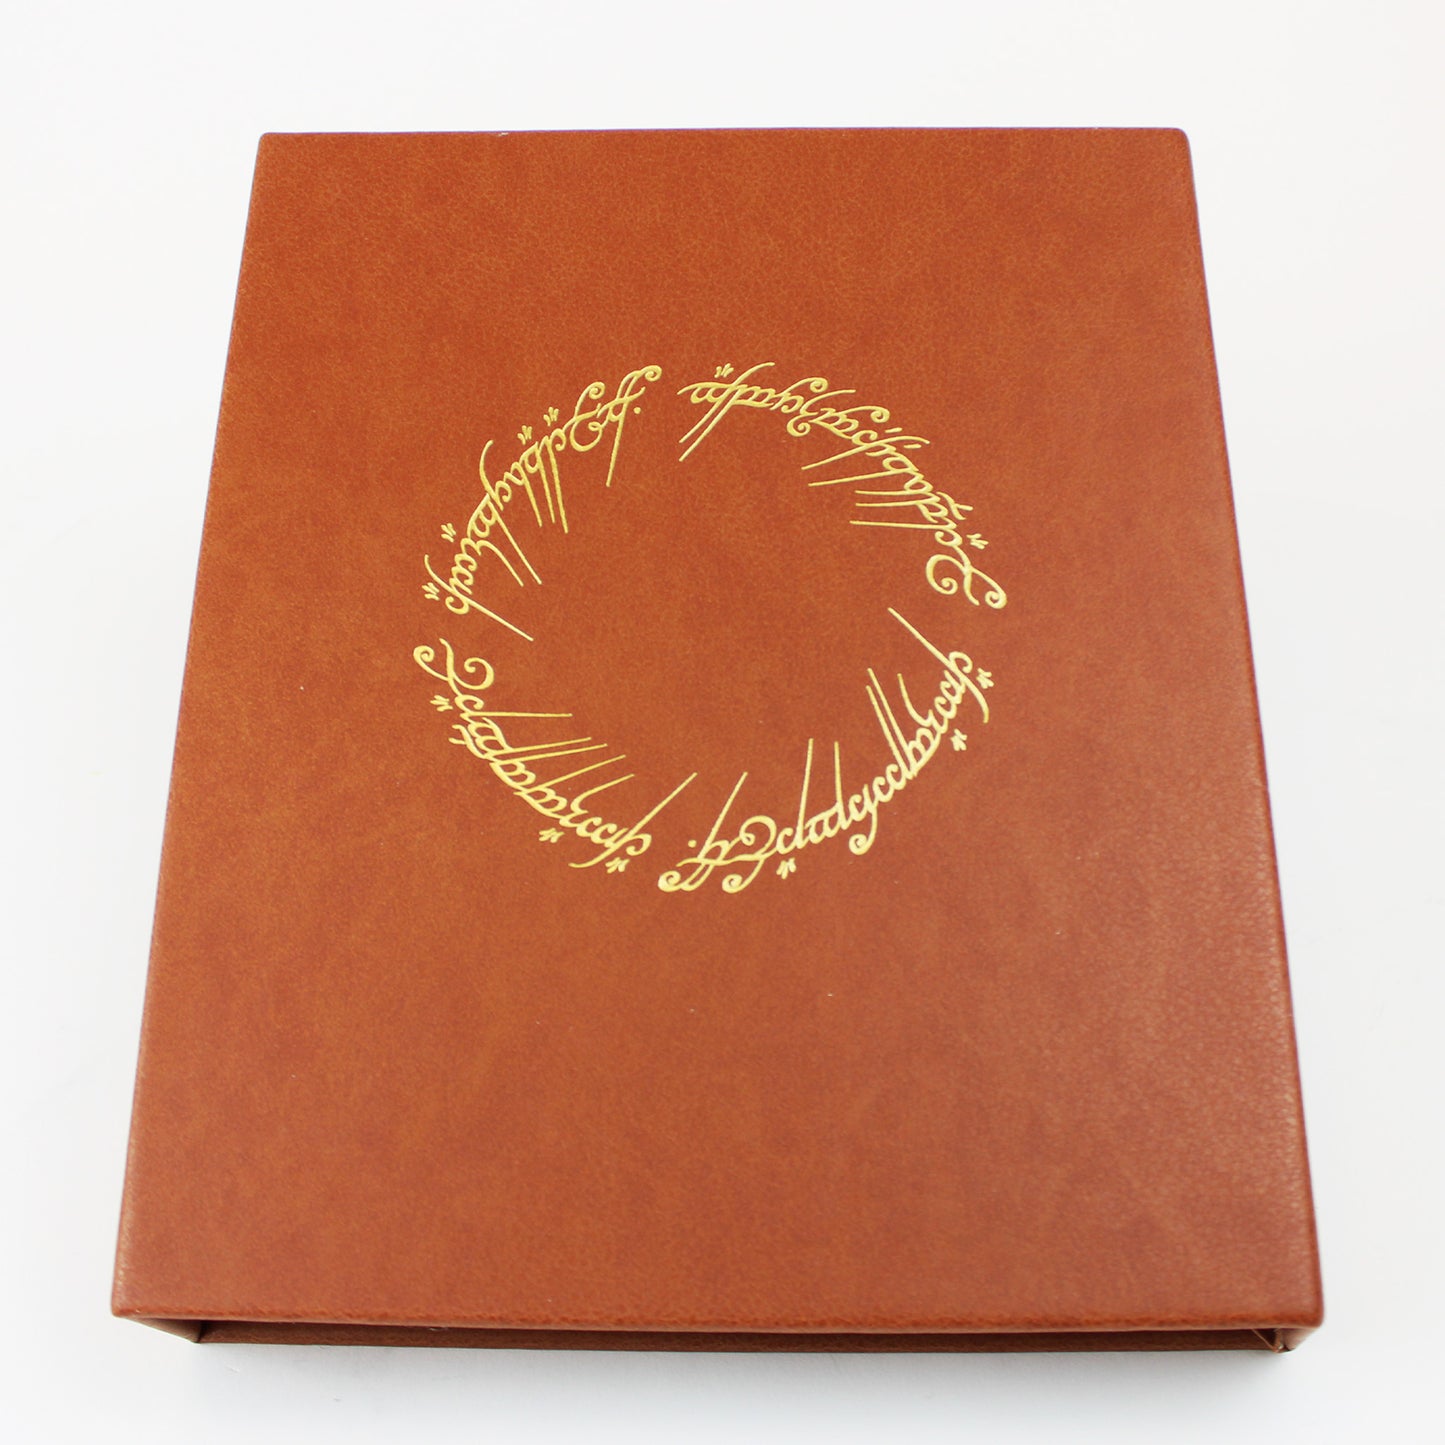 Lord of the Rings Stationery Box Set